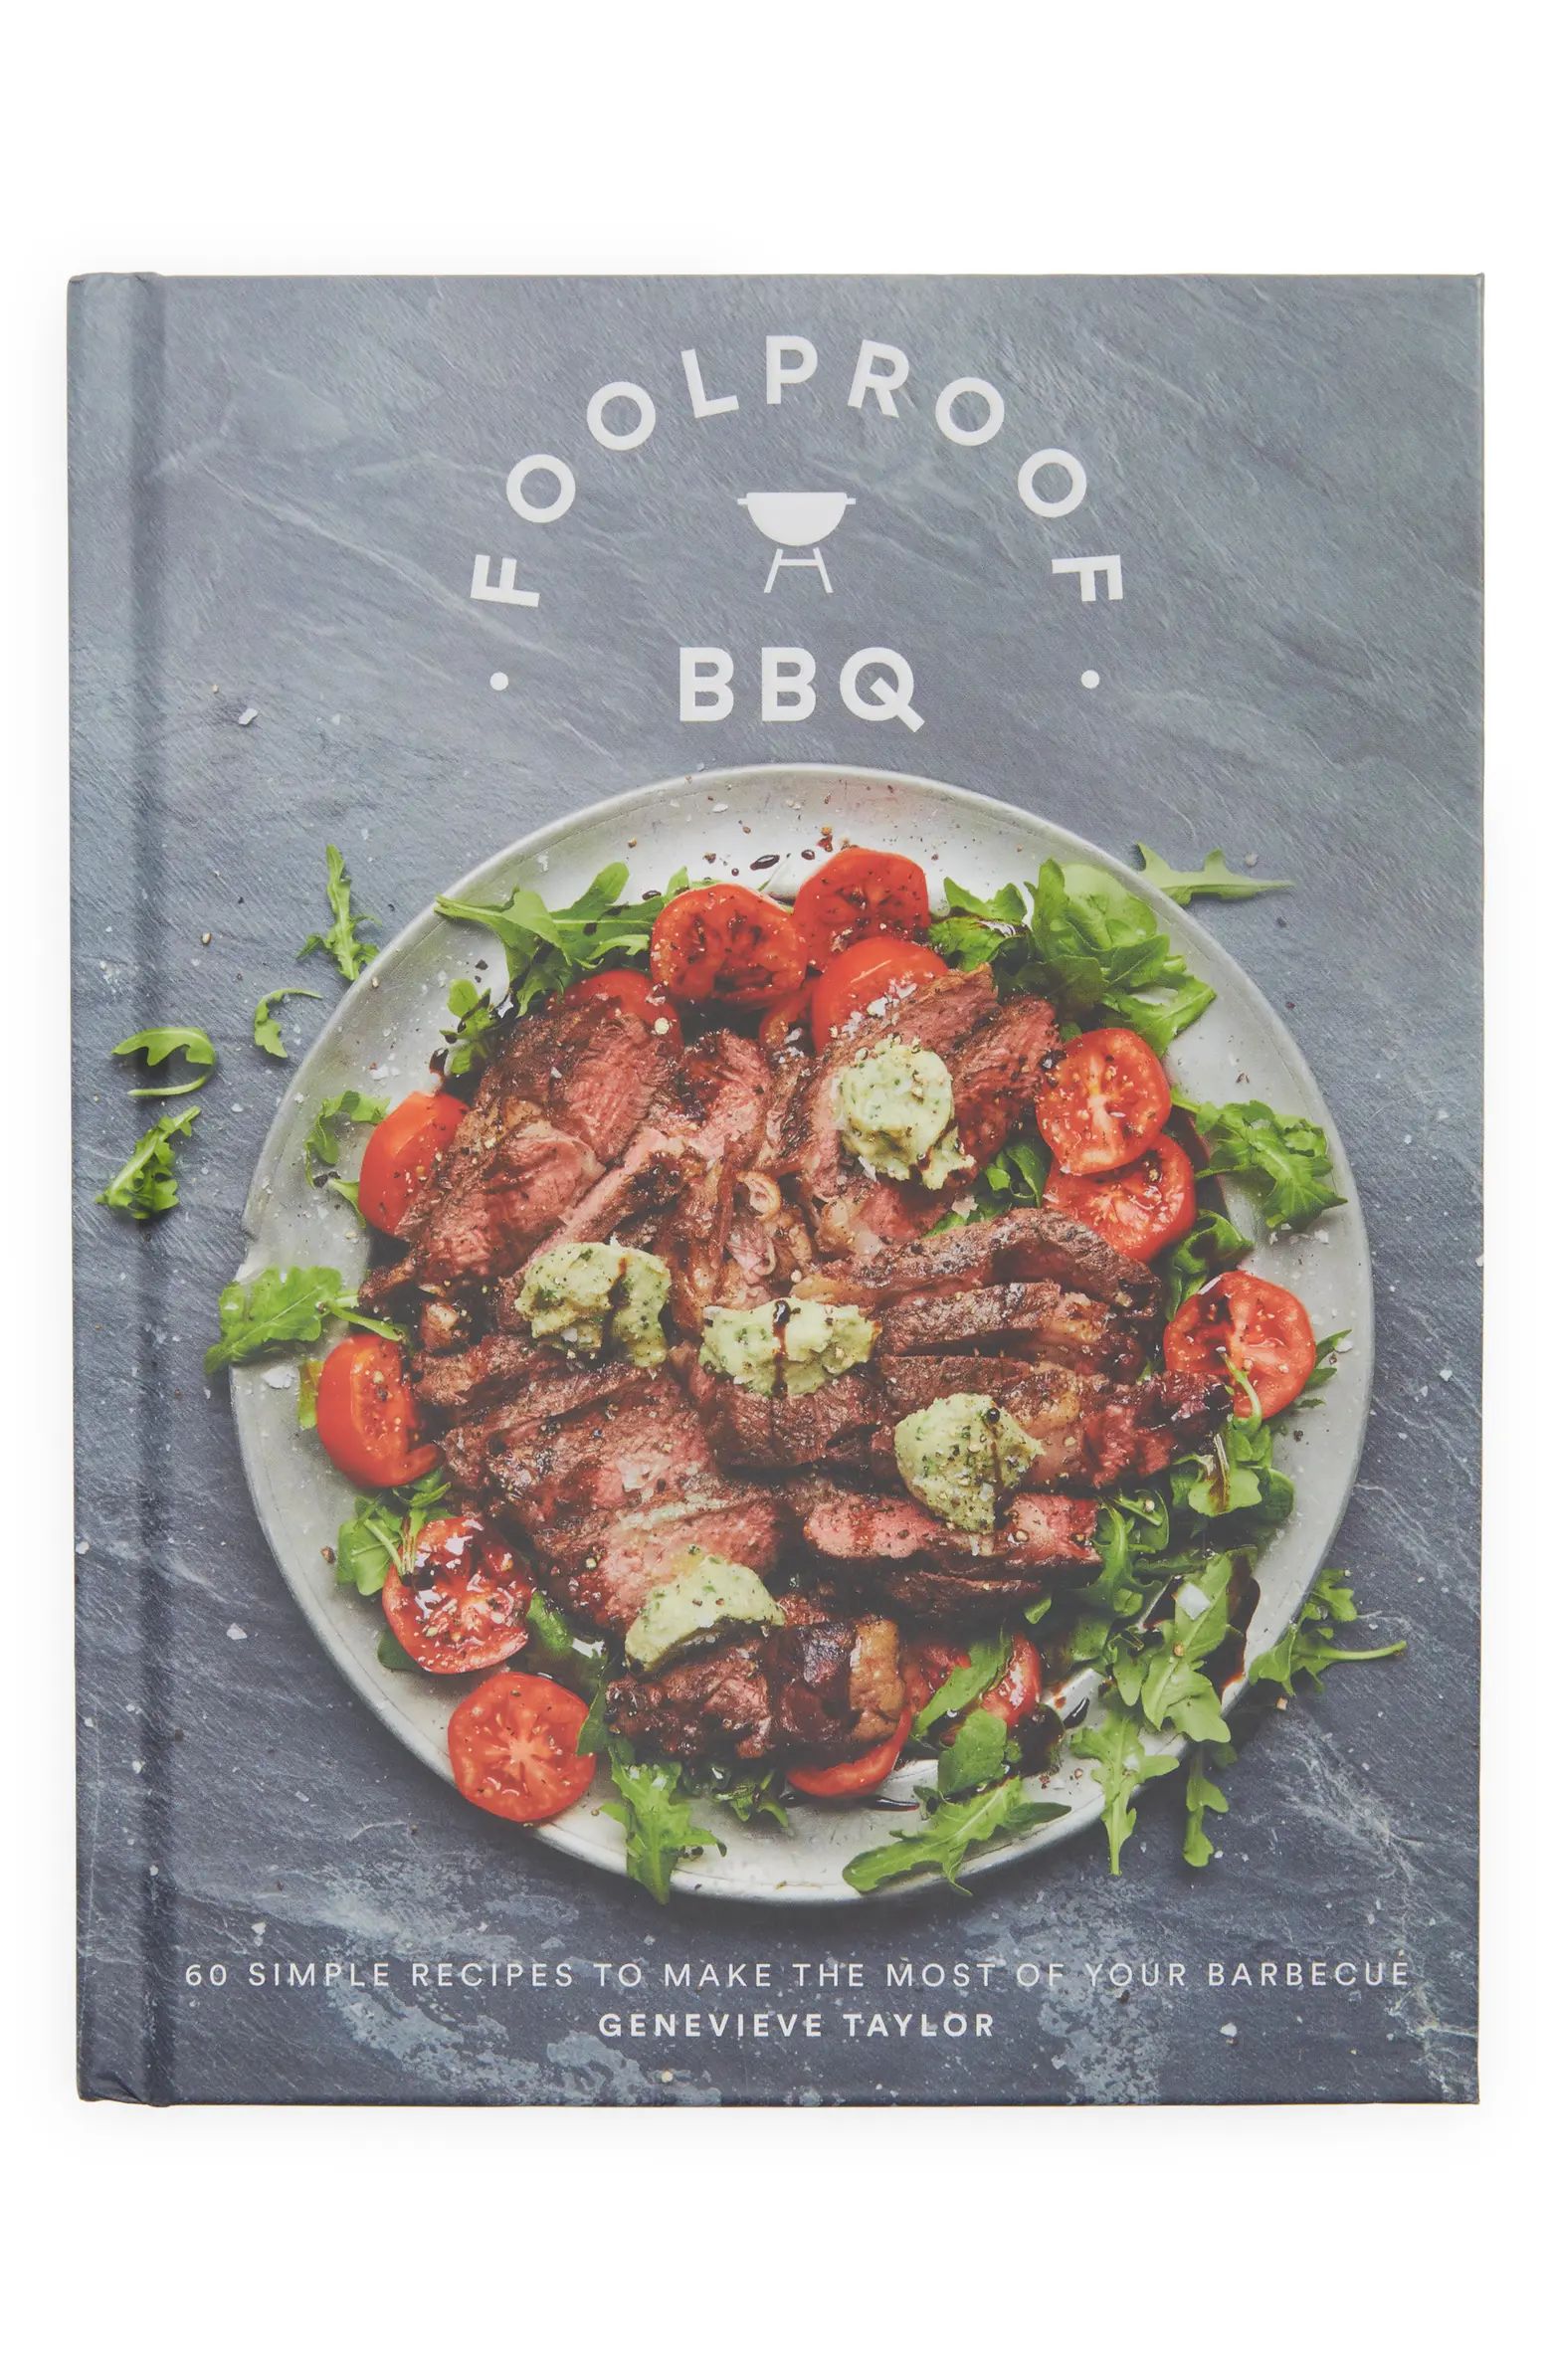 'Foolproof BBQ: 60 Simple Recipes to Make the Most of Your Barbecue' Book | Nordstrom